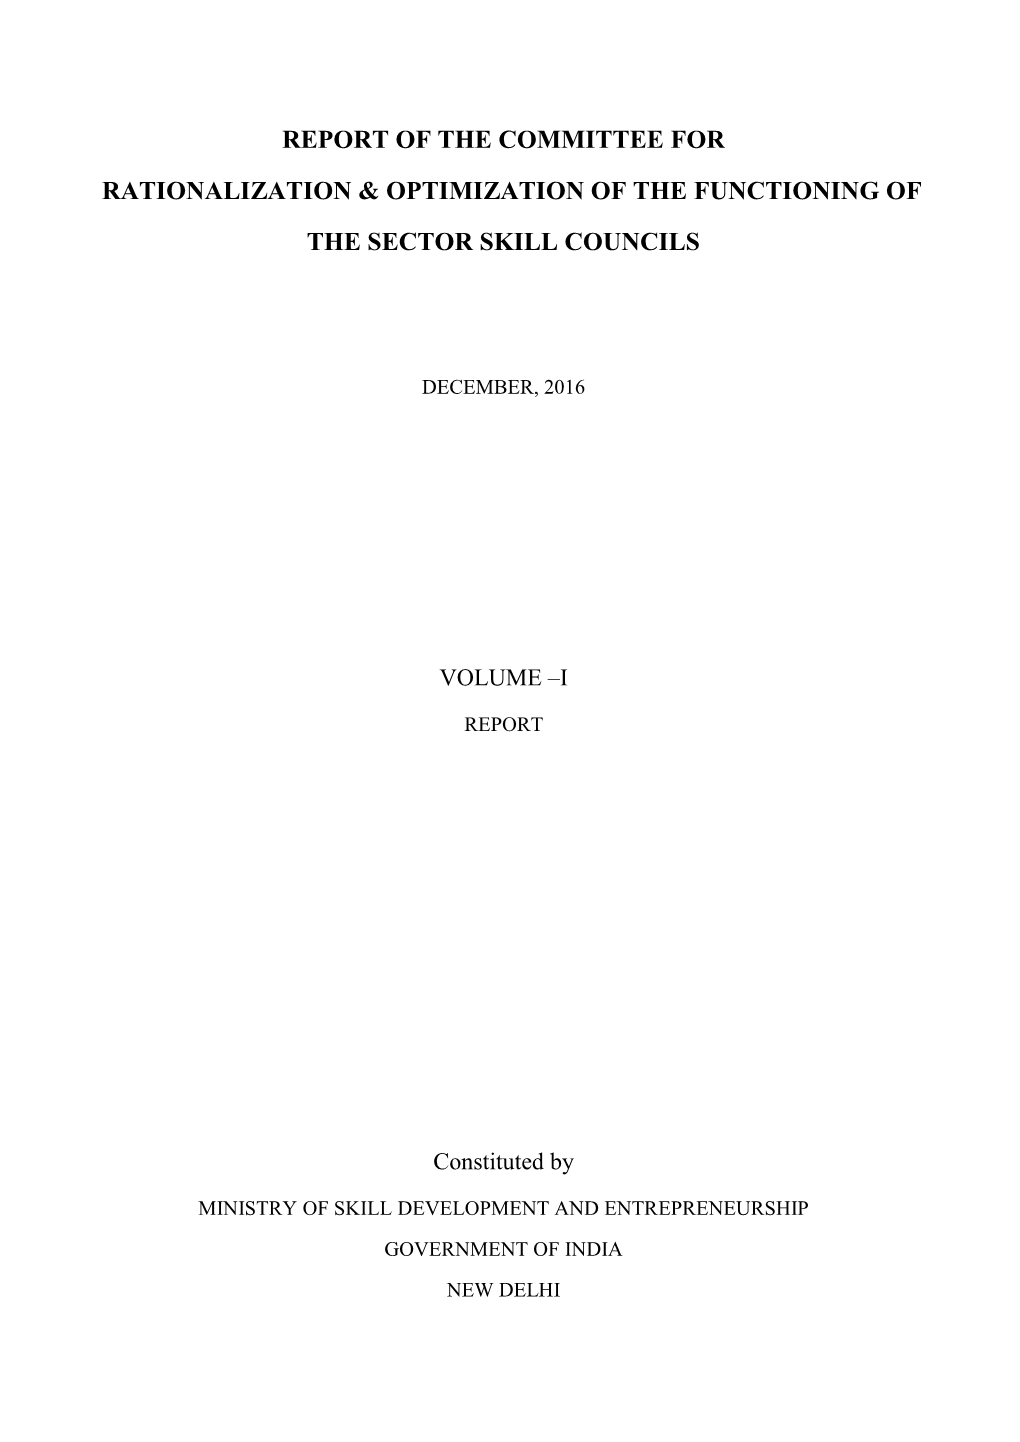 Report of the Committee for Rationalization & Optimization of the Functioning of the Sector Skill Councils